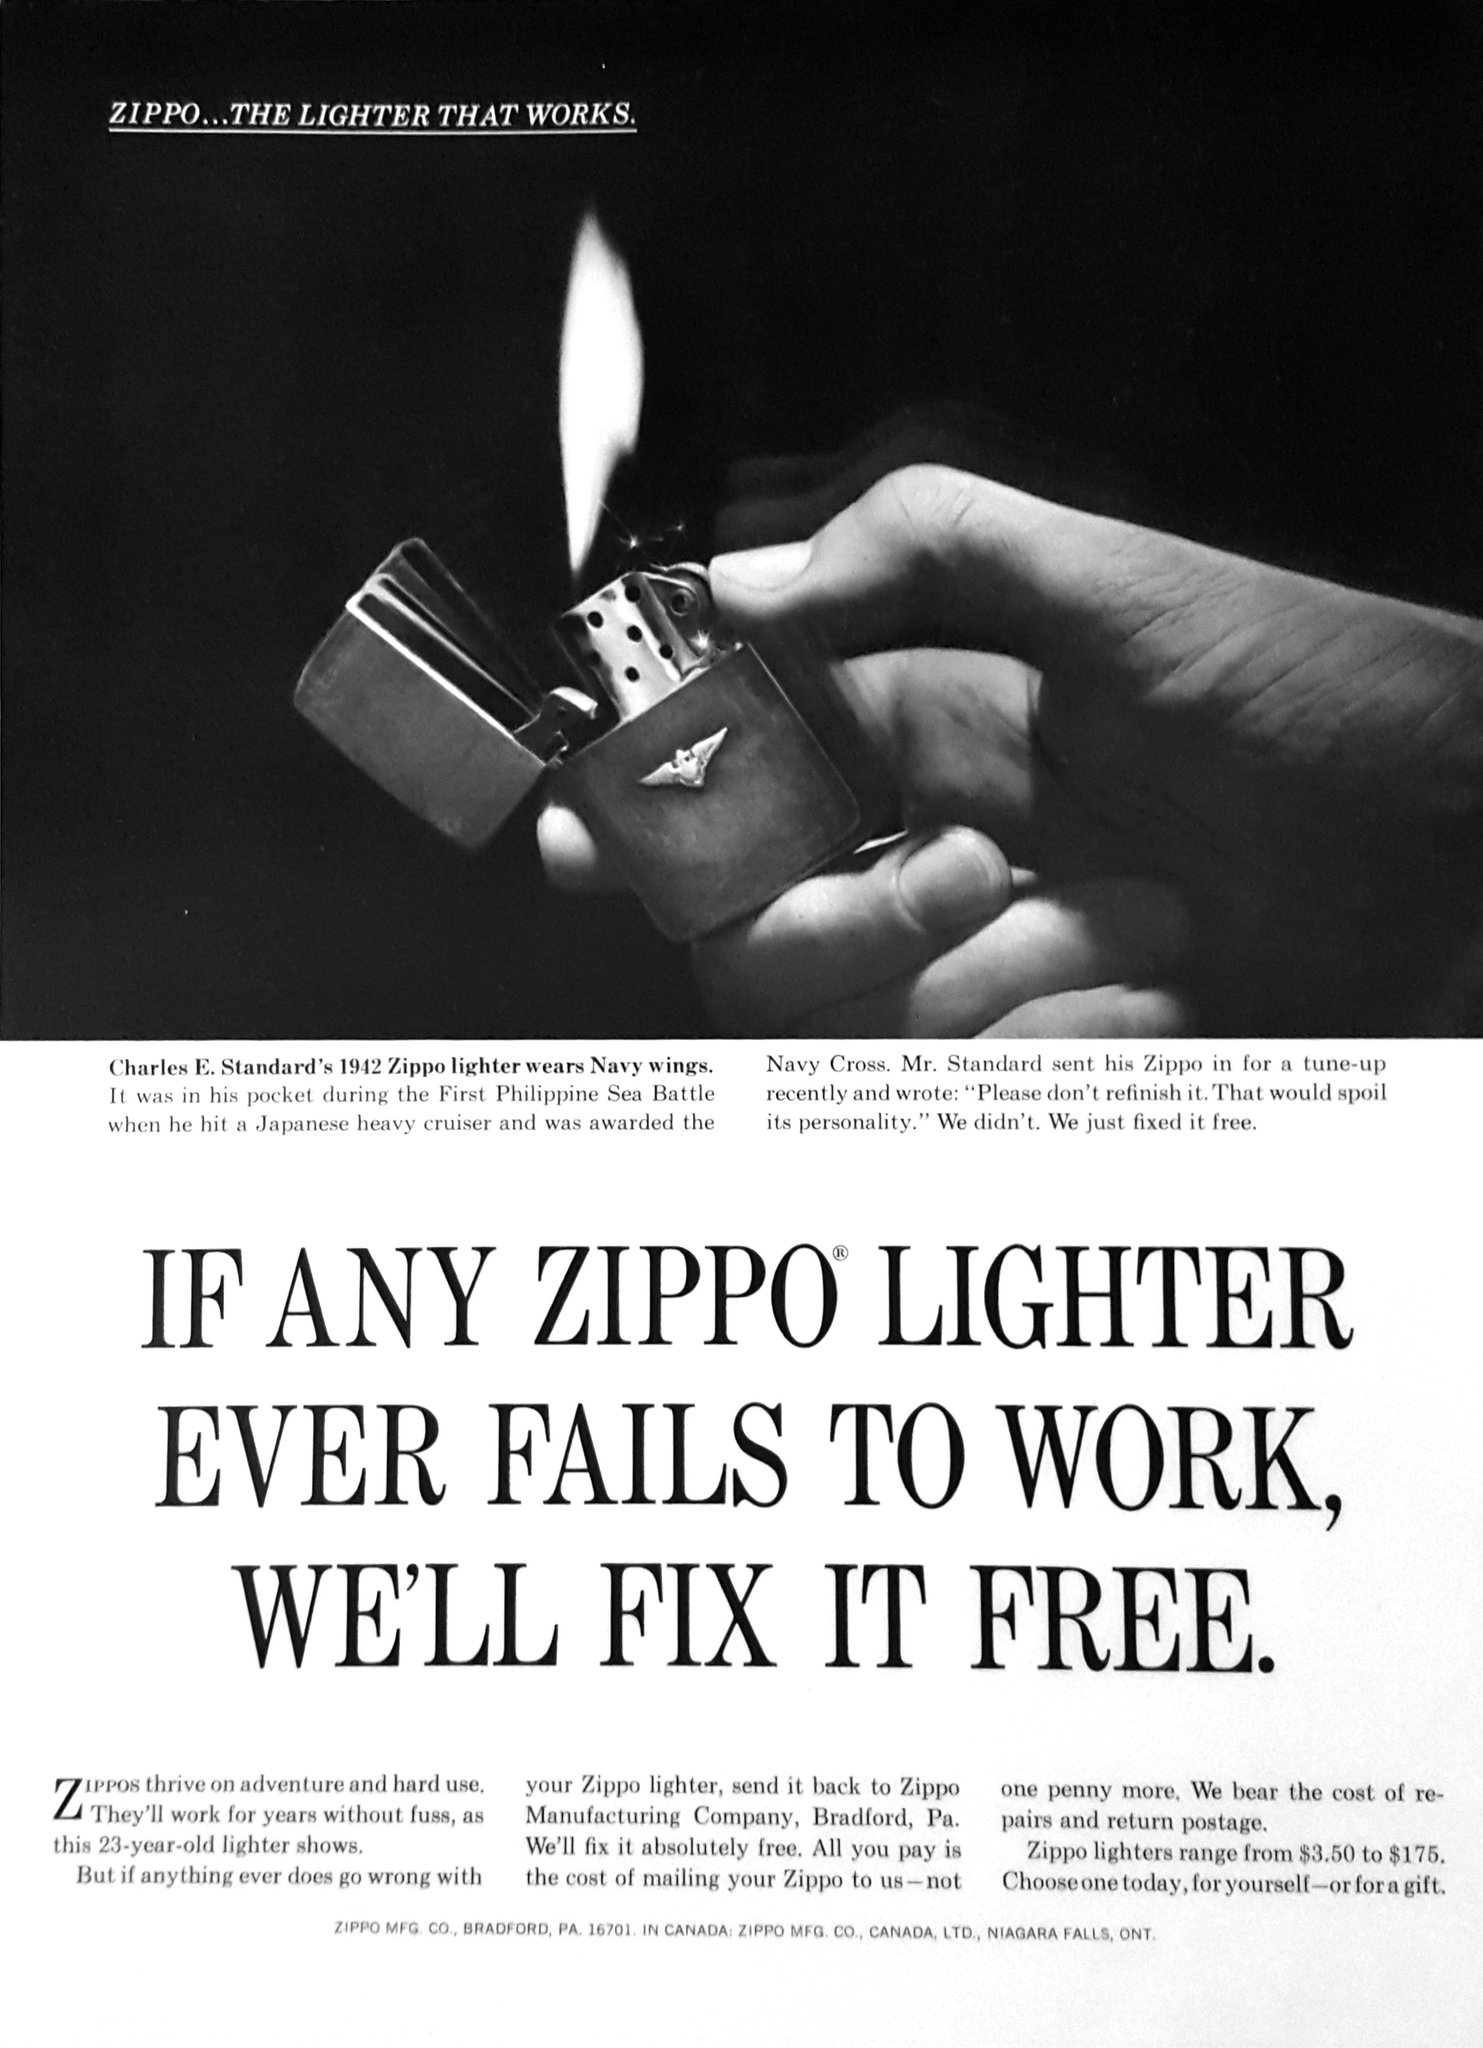 Zippo on "This #VintageAd from 1984 said it best: "Zippos thrive on adventure and hard use." To this day, you can us up on our lifetime guarantee and send your